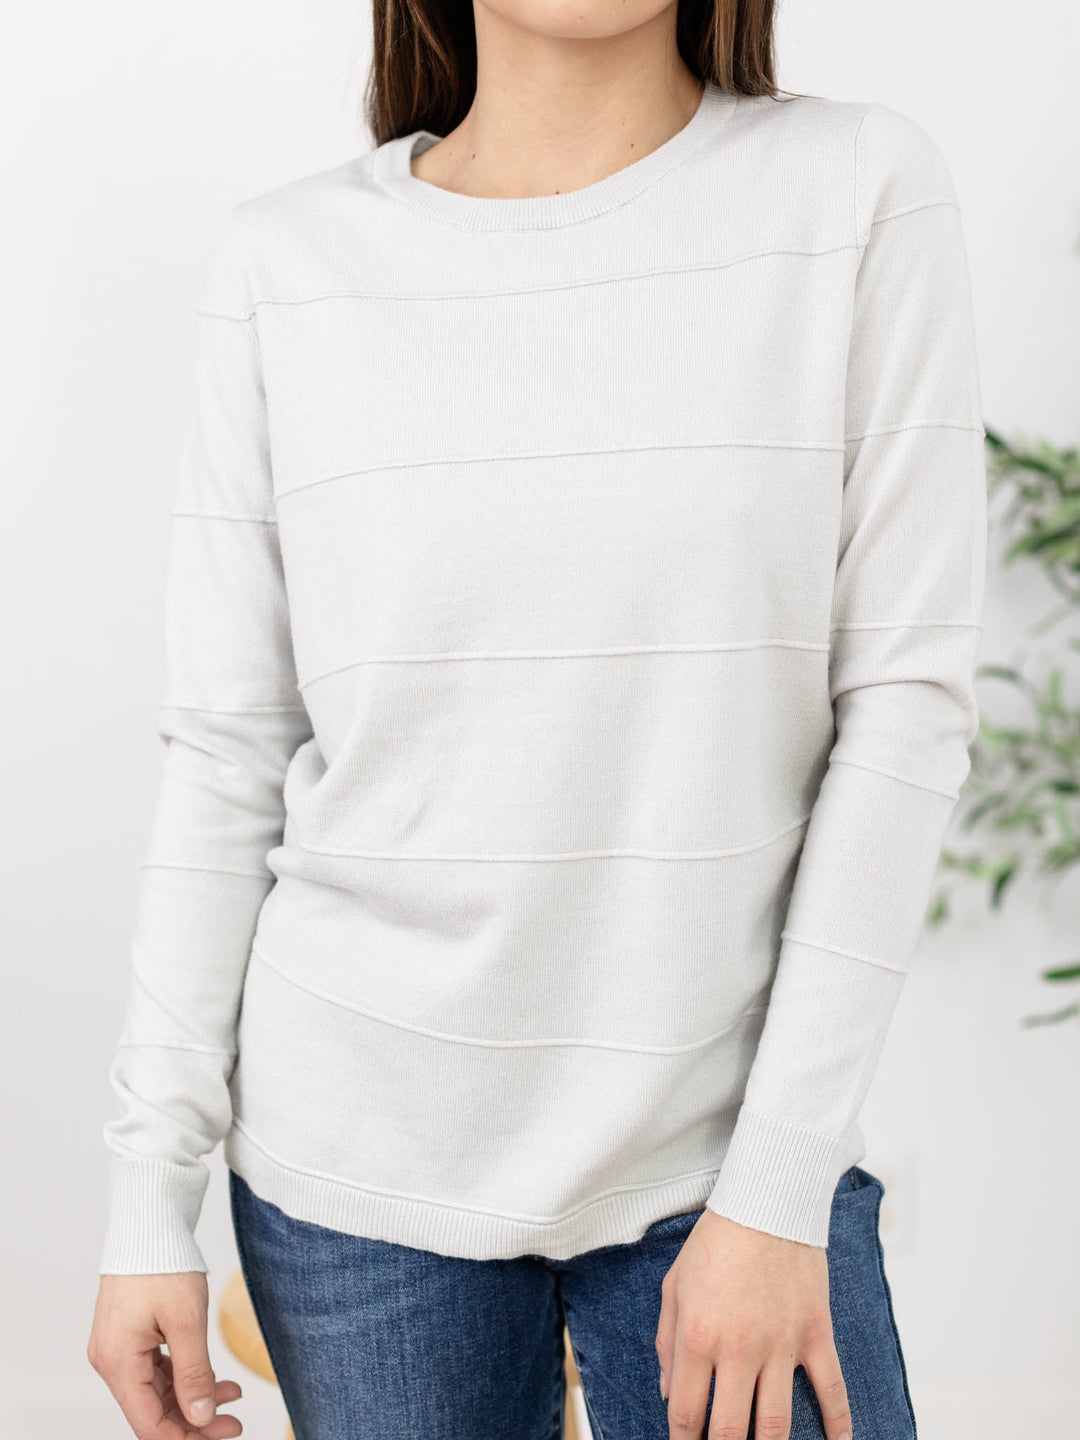 Stacatto-Stripe Texture Pin Tucked Pullover - Leela and Lavender